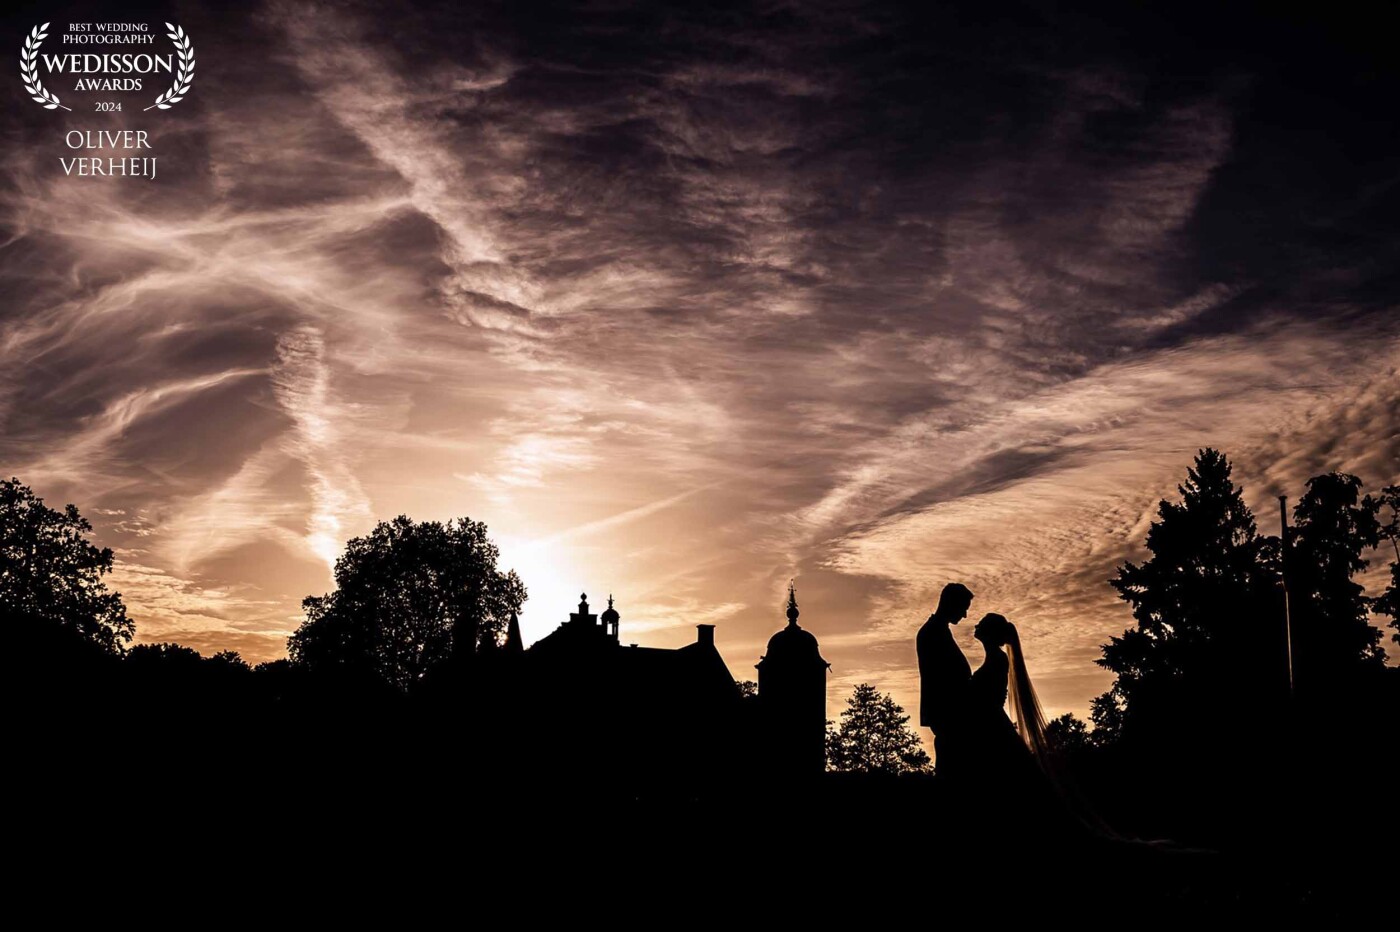 Twilight is one of the most magical moments of the day. This bride and groom lived their own fairytale marriage in a castle. It's stunning contours you can see in the silhouette of the background.